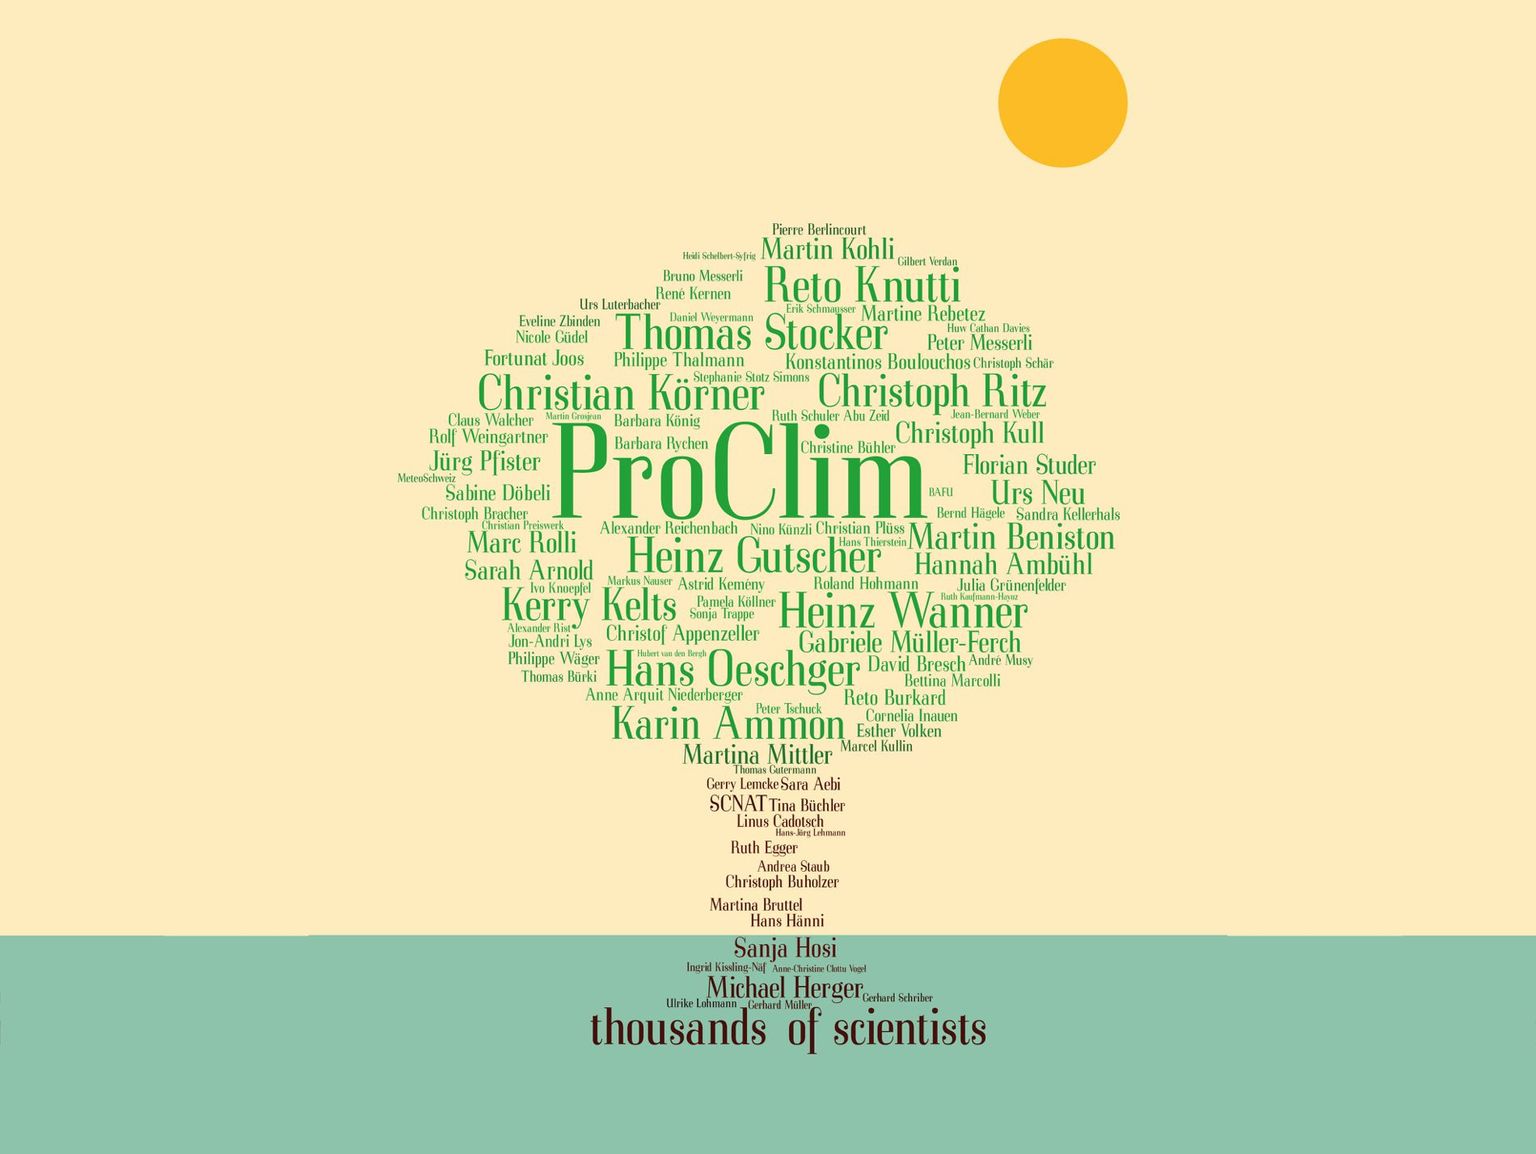 The ProClim tree has been growing with the help of thousands of committed people.